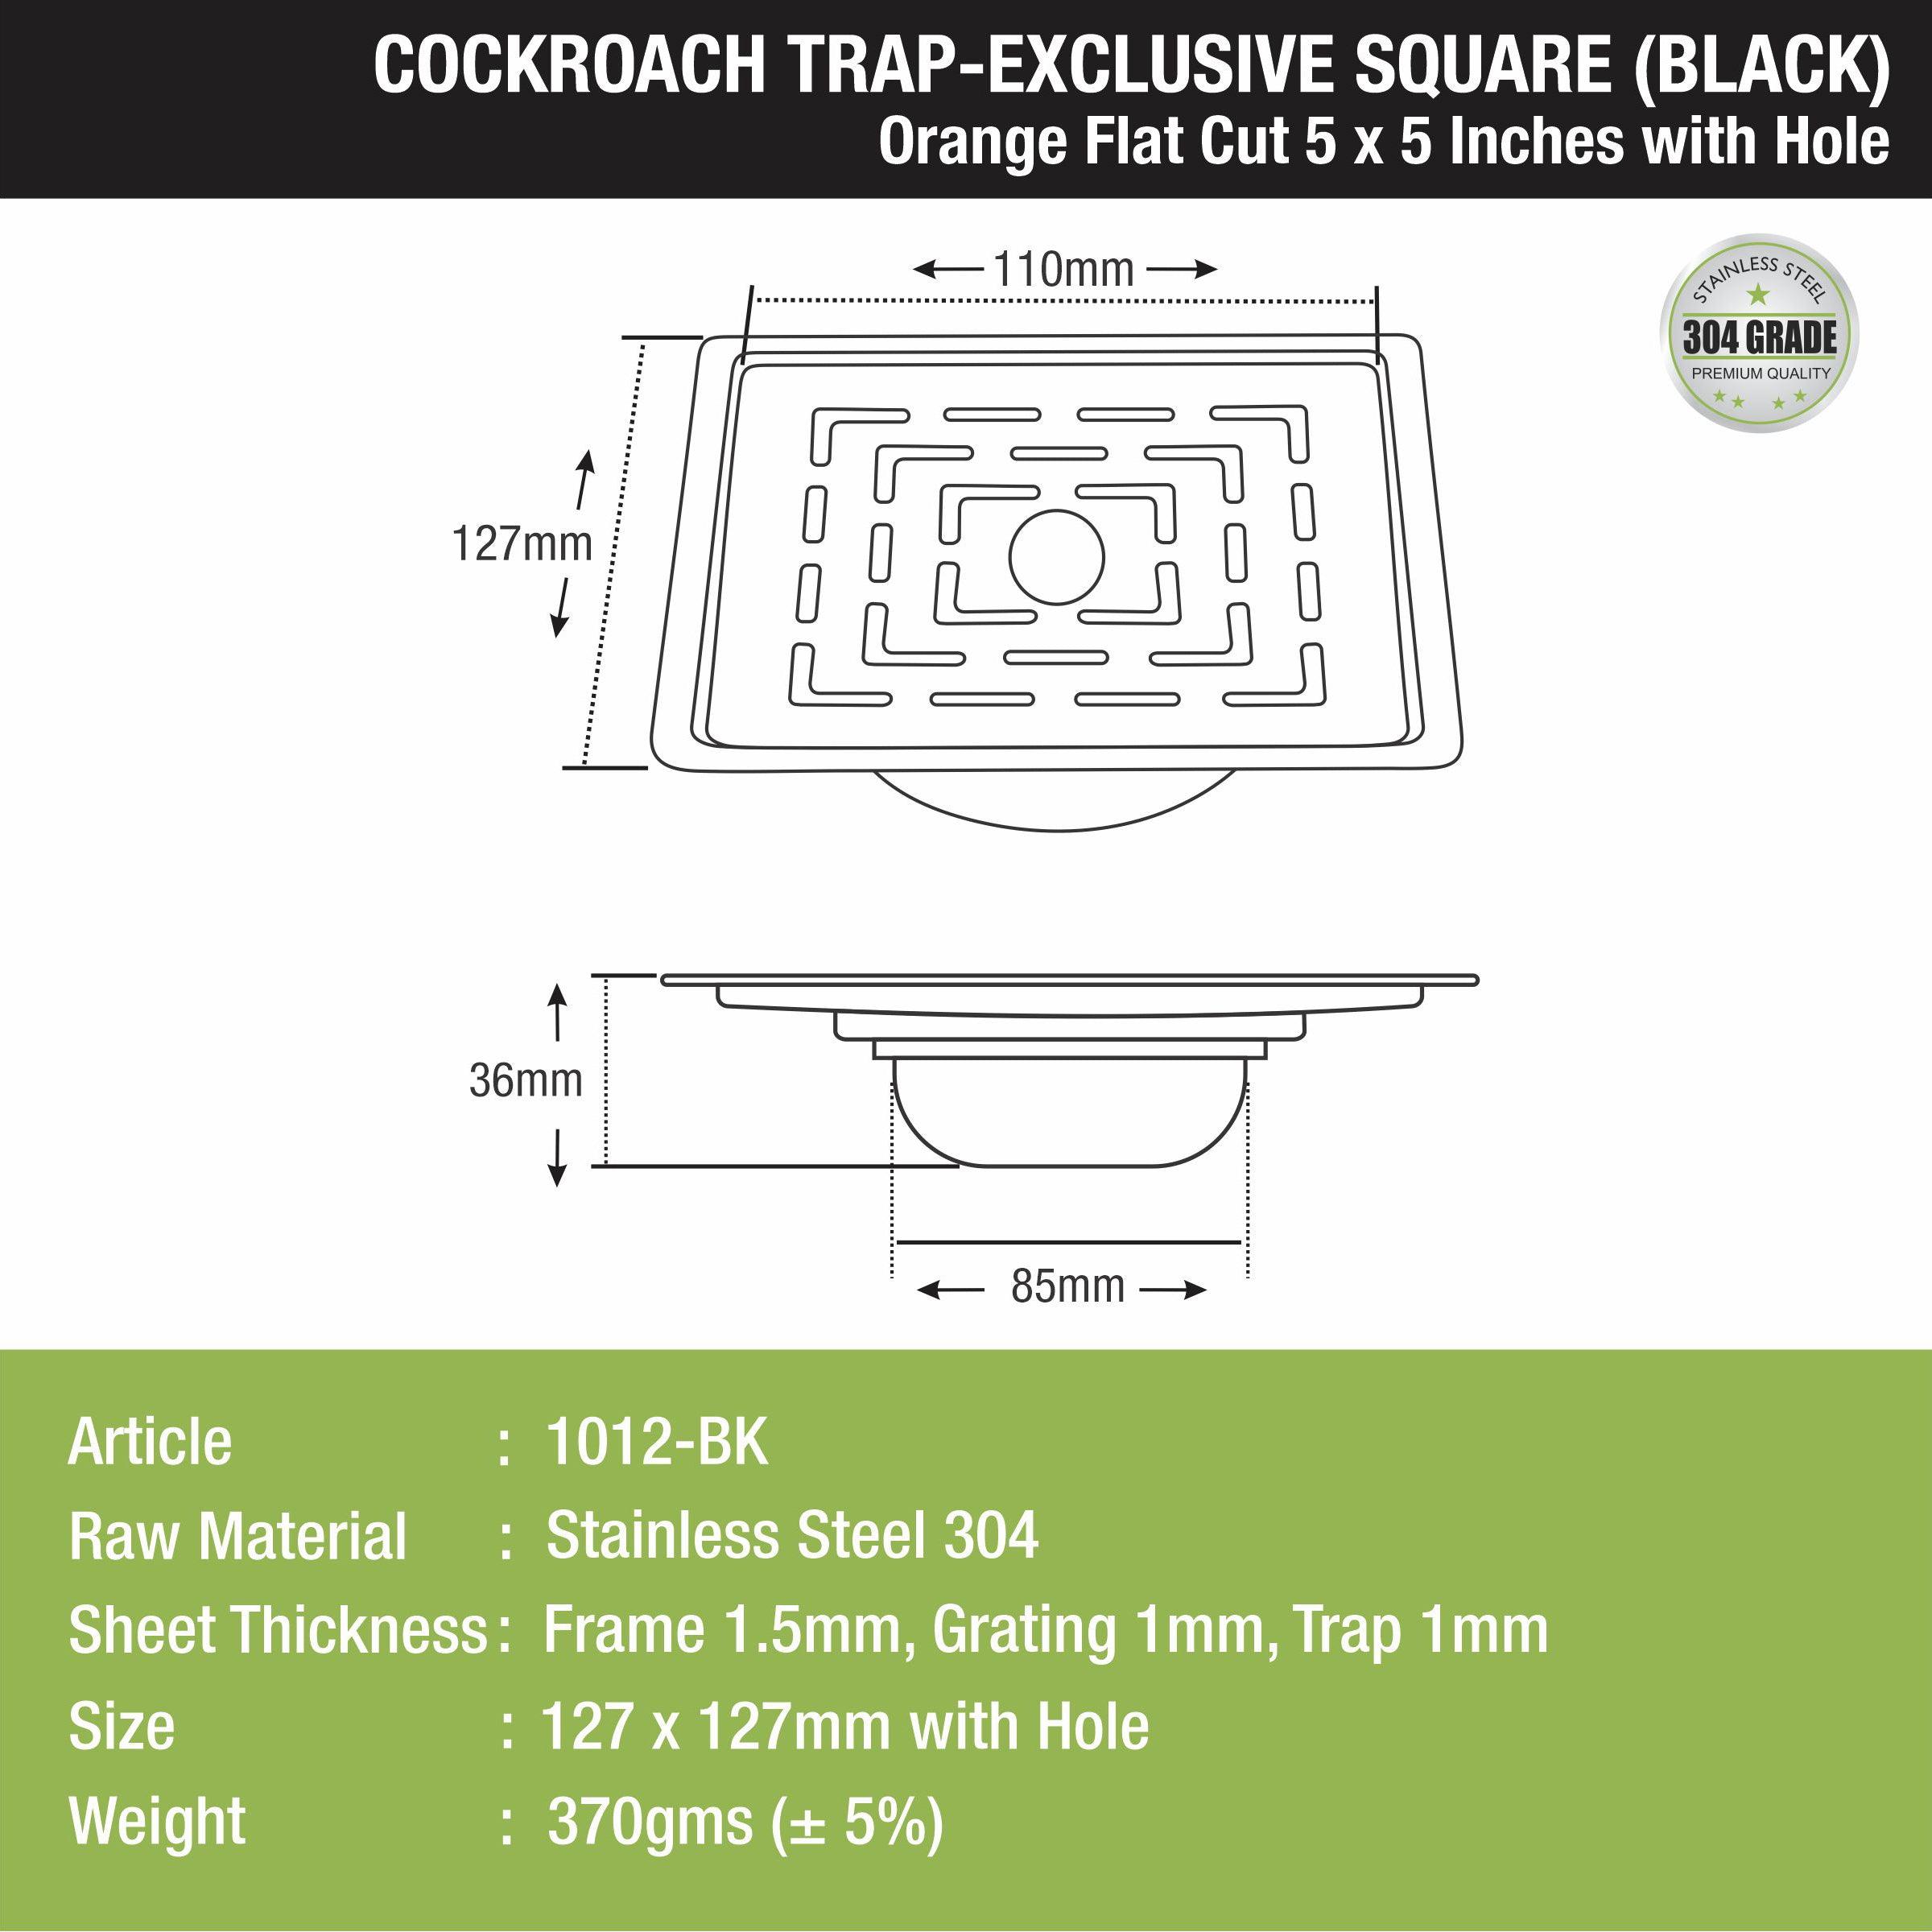 Orange Flat Cut Exclusive Square Floor Drain in Black PVD Coating (5 x 5 Inches) with Hole & Cockroach Trap size and measurement 